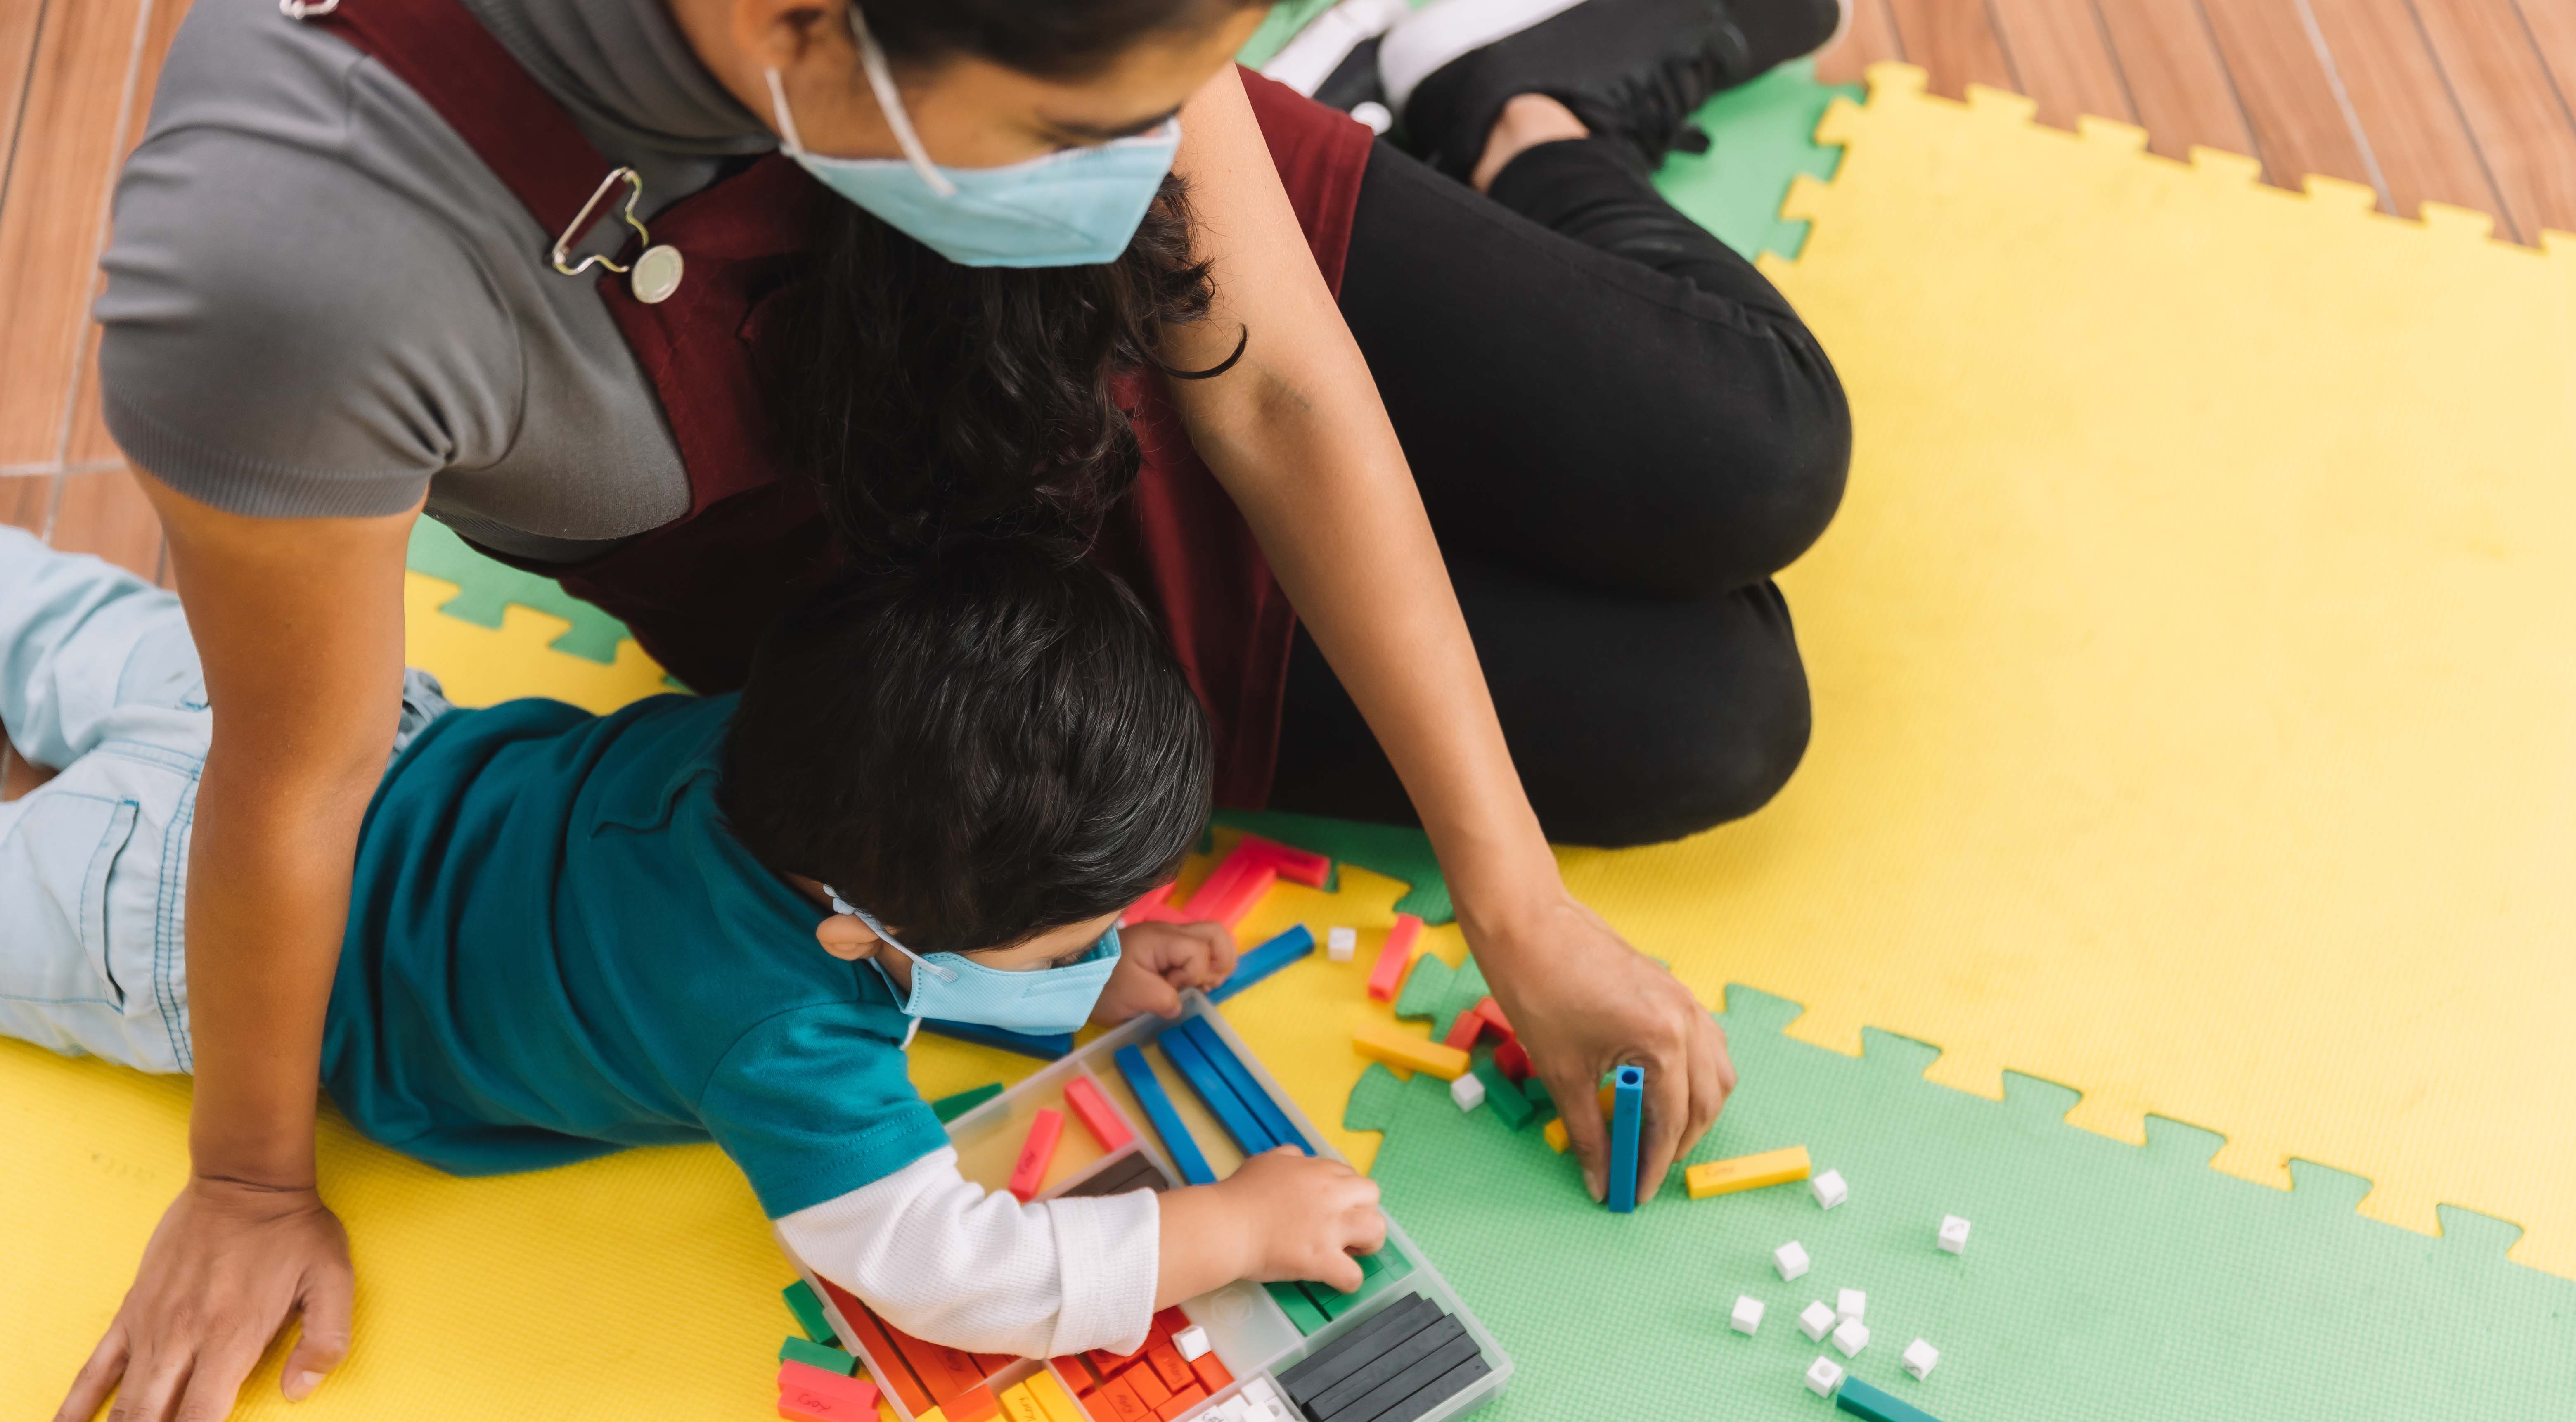 SDSUs Center for Excellence in Early Development is expanding a family child care support program into El Cajon. Above, a teacher plays on the floor with a preschool boy.